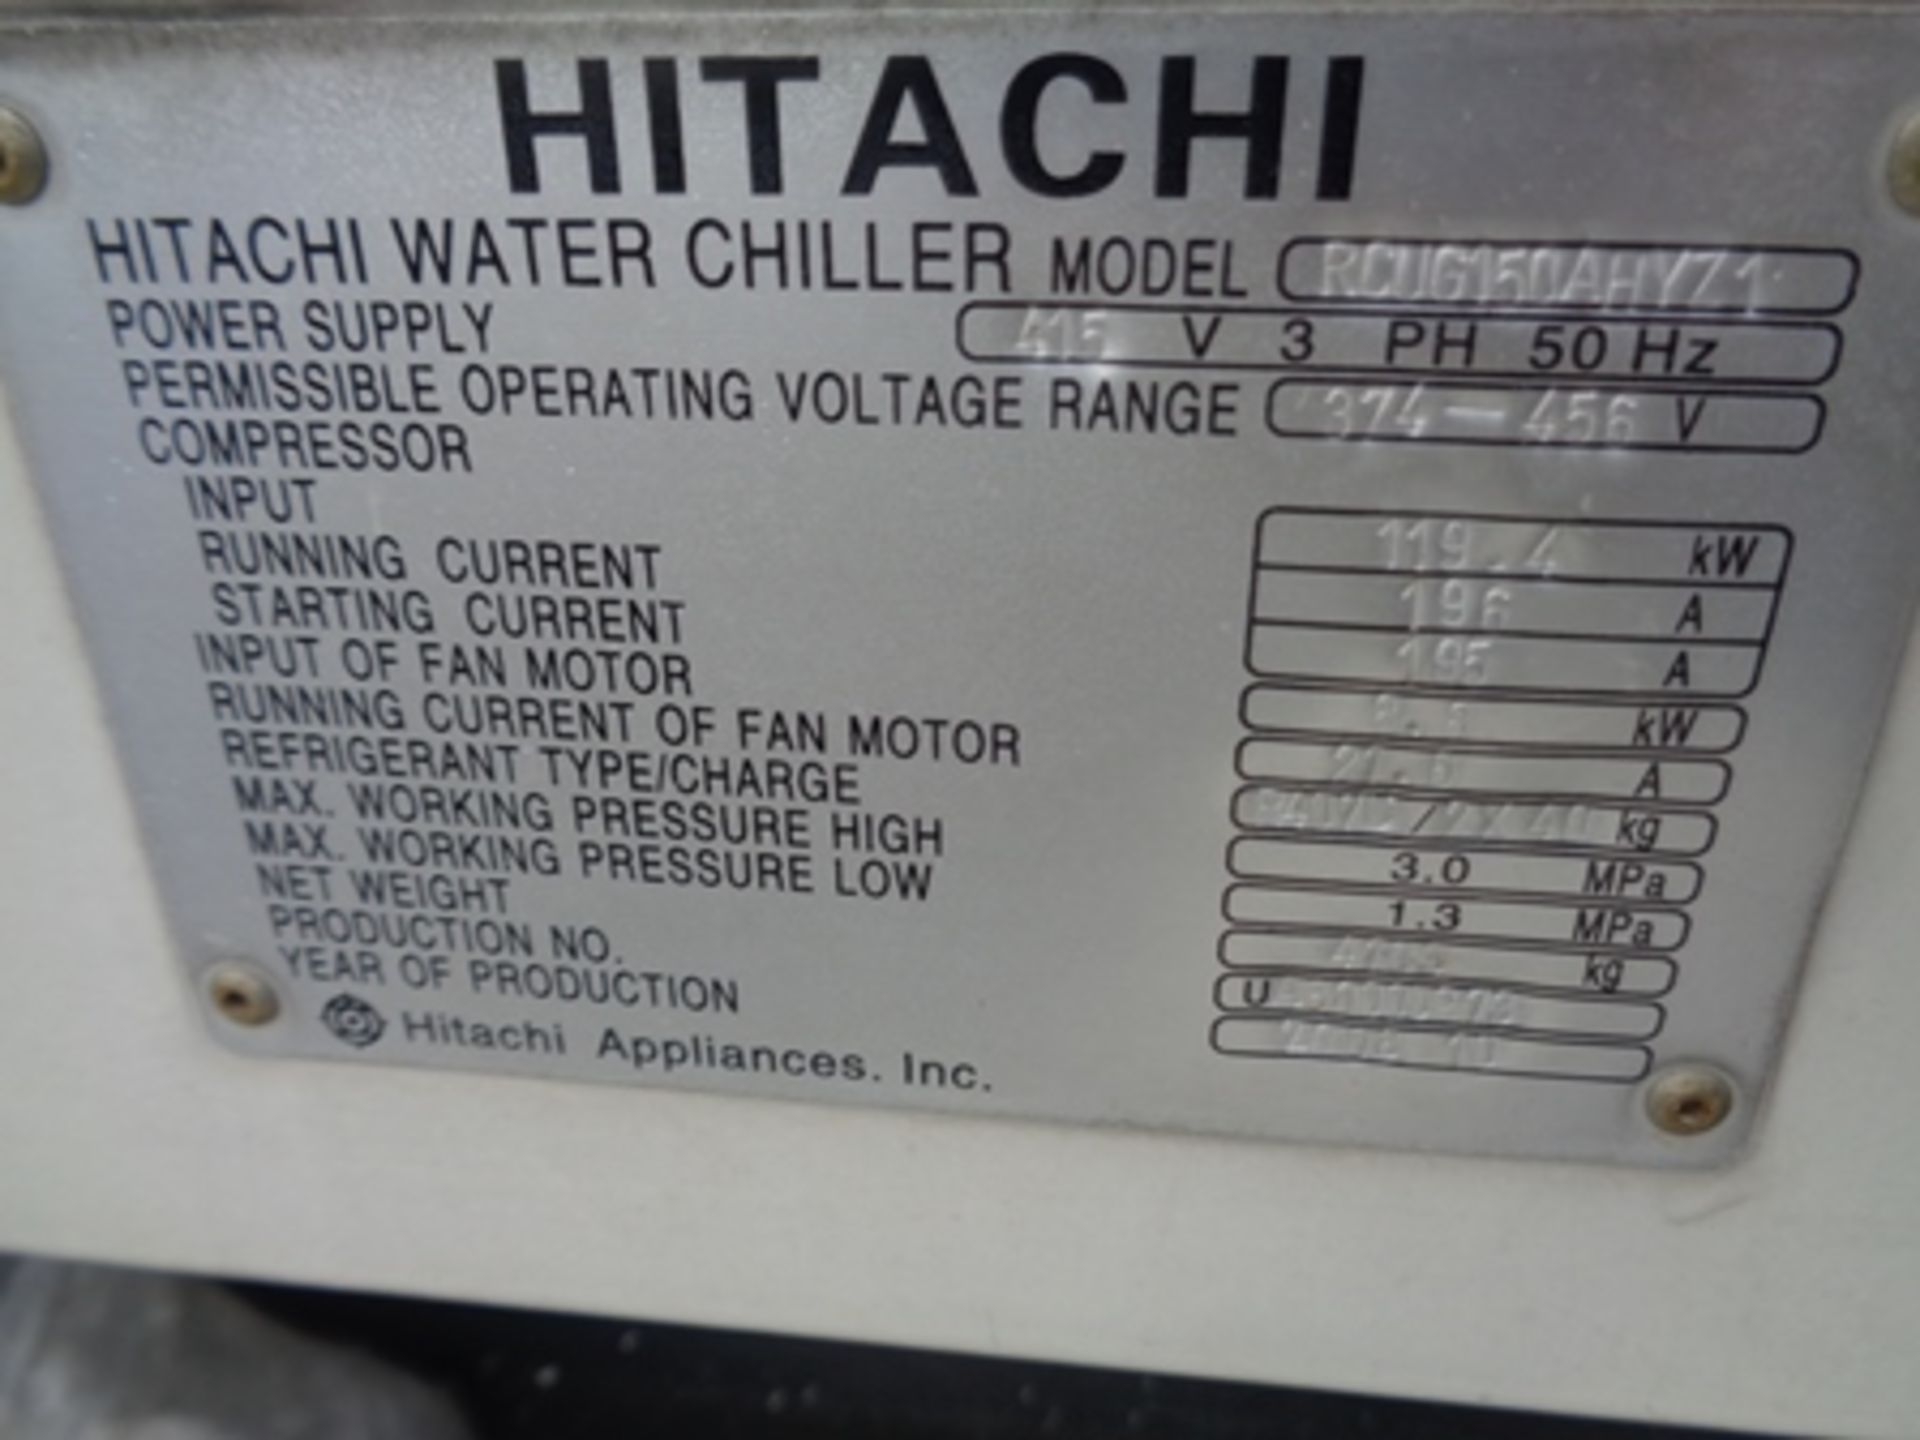 Hitachi ""H Series"" air cooled chiller model RCUG 150AHYZ1. 103 tons. new 2011. Chiller utilizes - Image 4 of 4